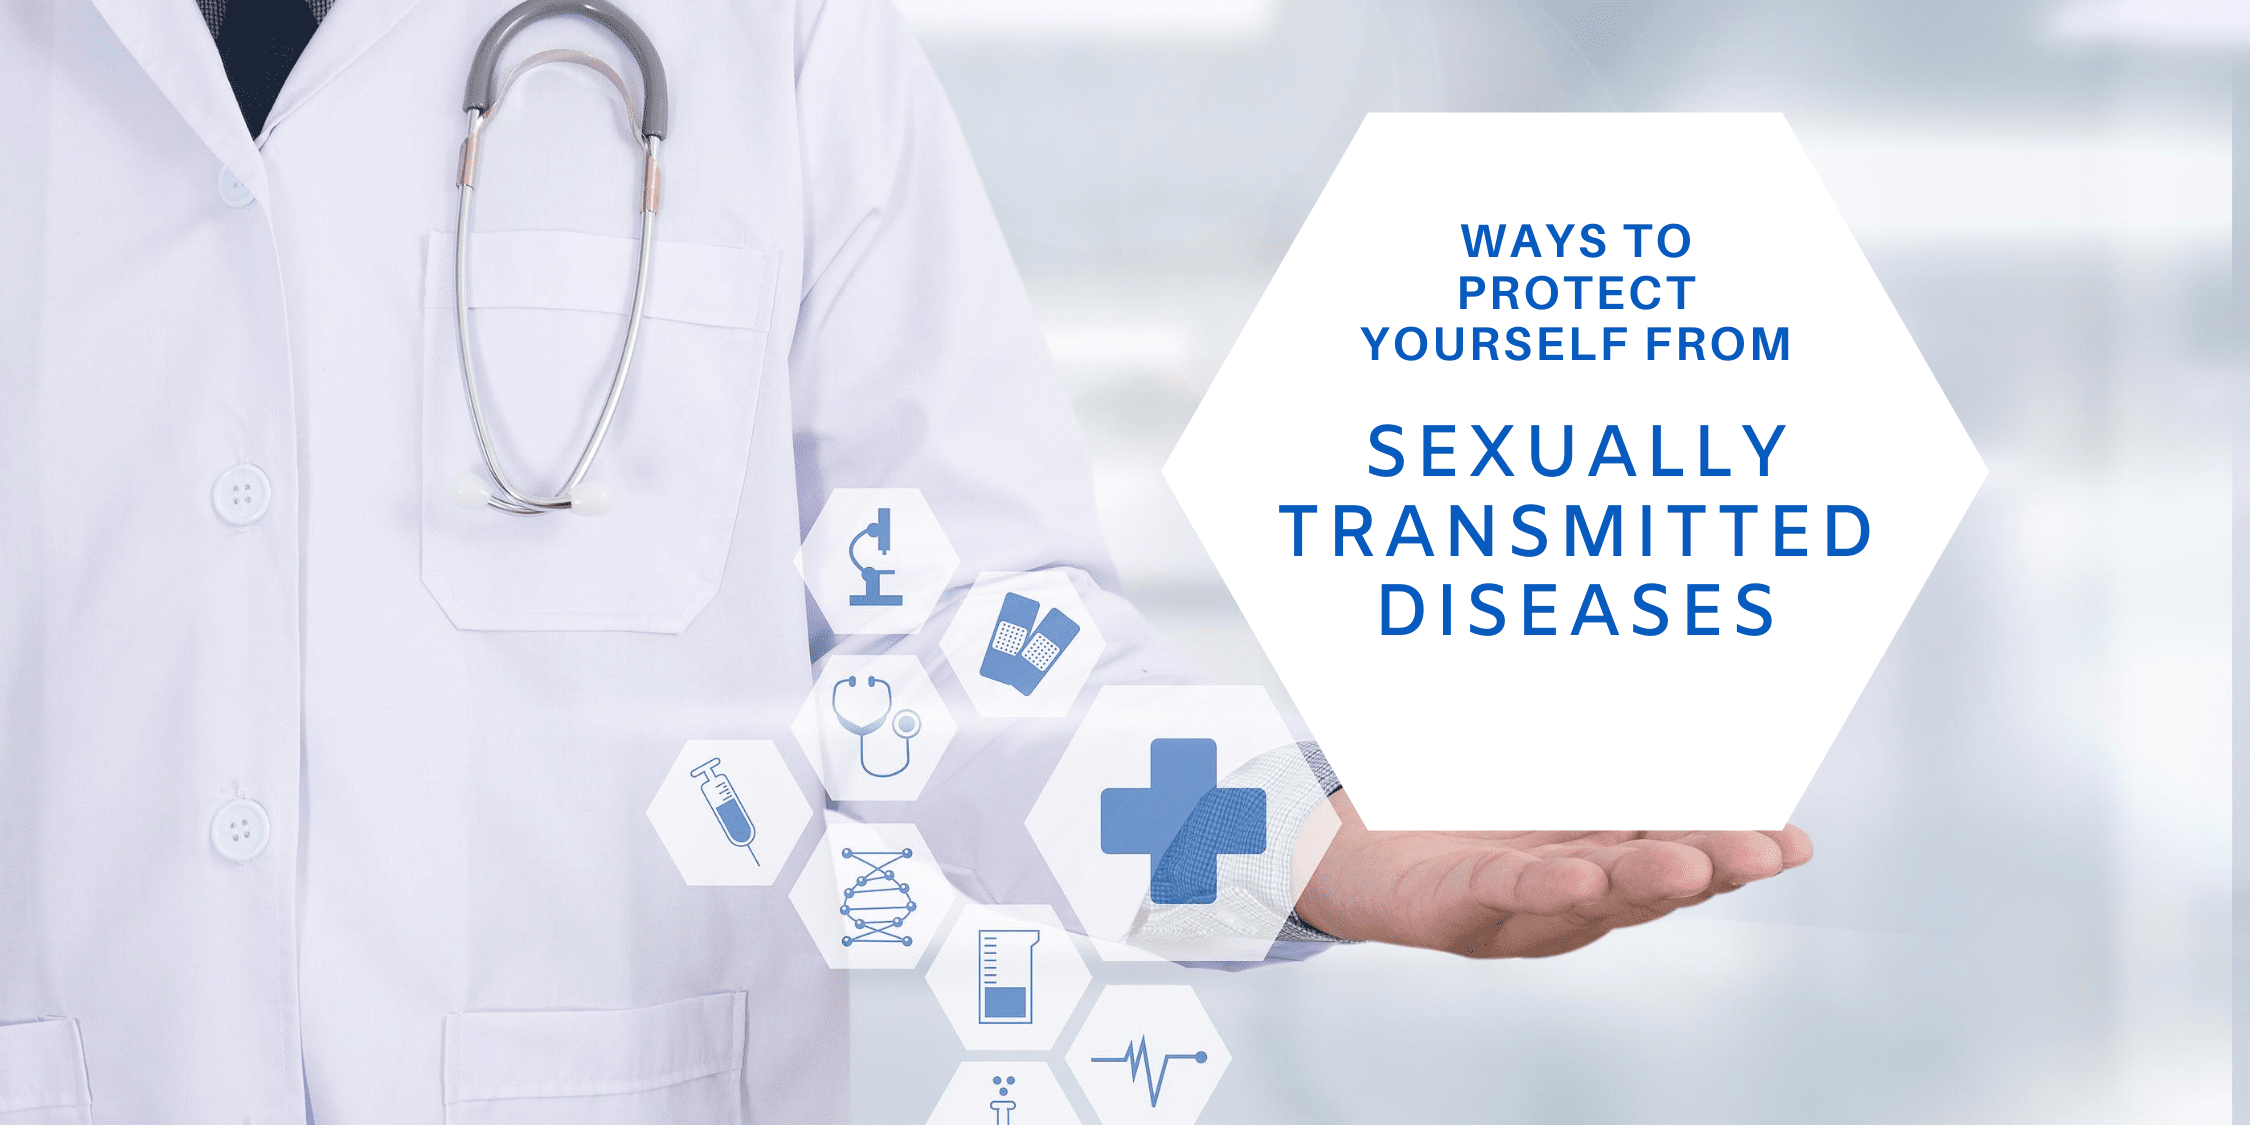 6 Suitable Ways to Stay Protected from Sexually Transmitted Diseases